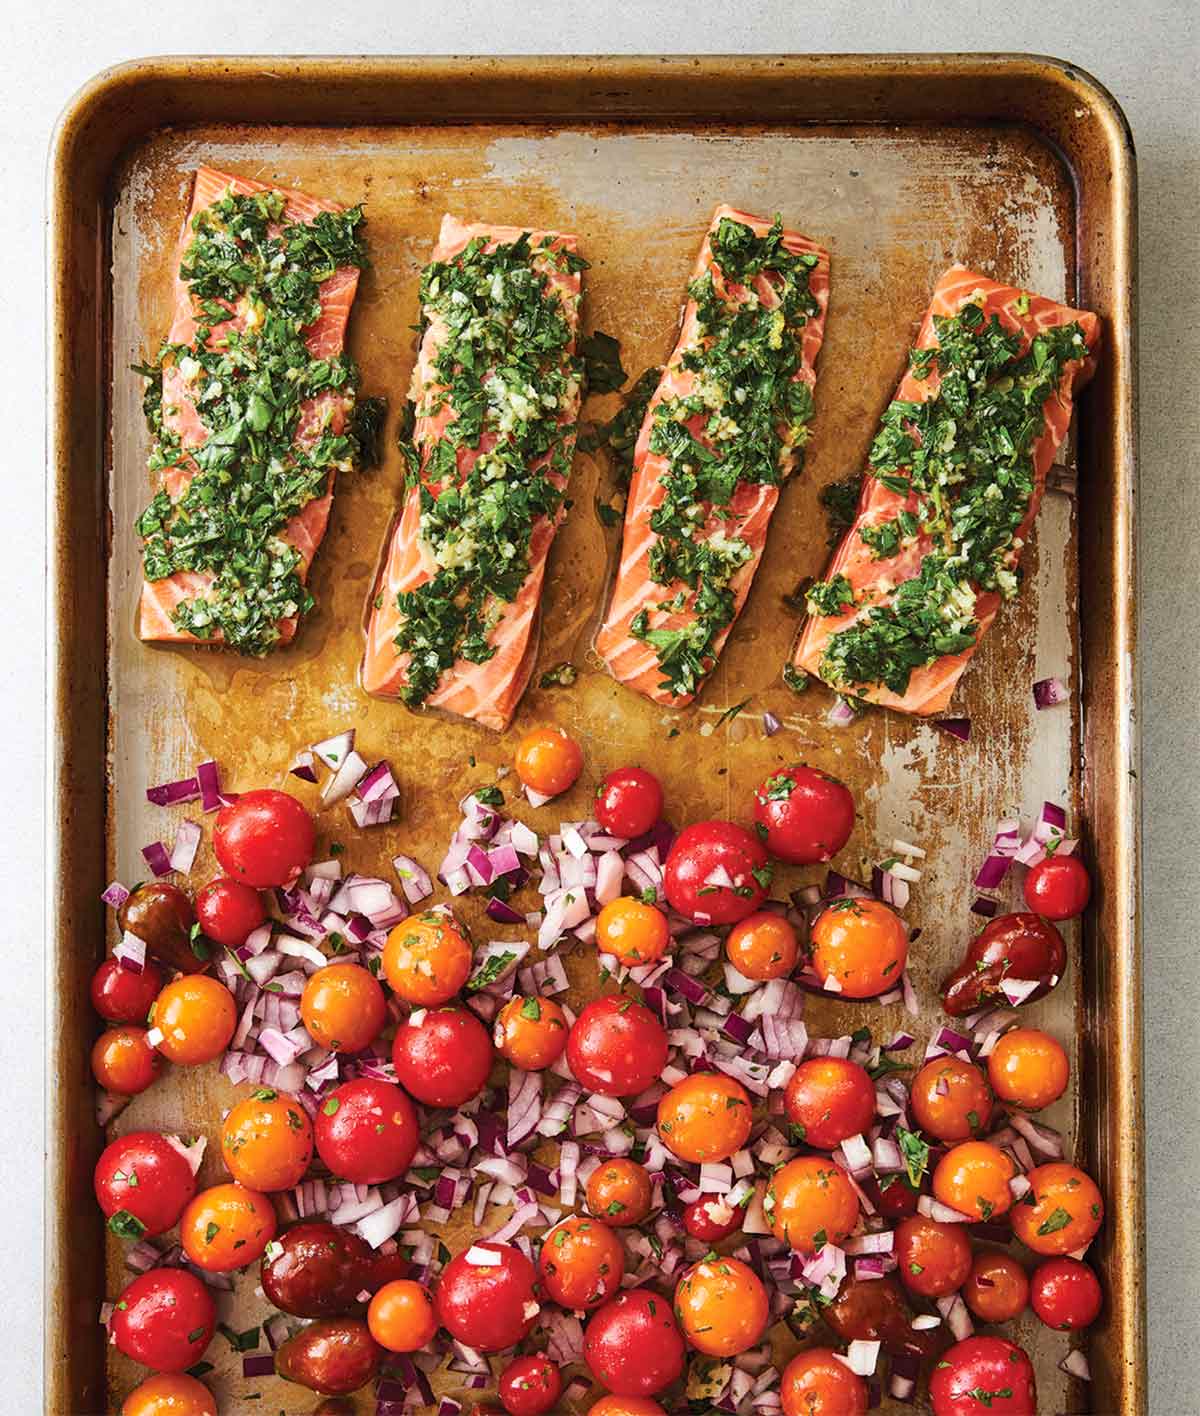 A metal sheet pan with 4 salmon fillets covered with gremolata, beside a pile of cherry tomatoes and diced red onions.